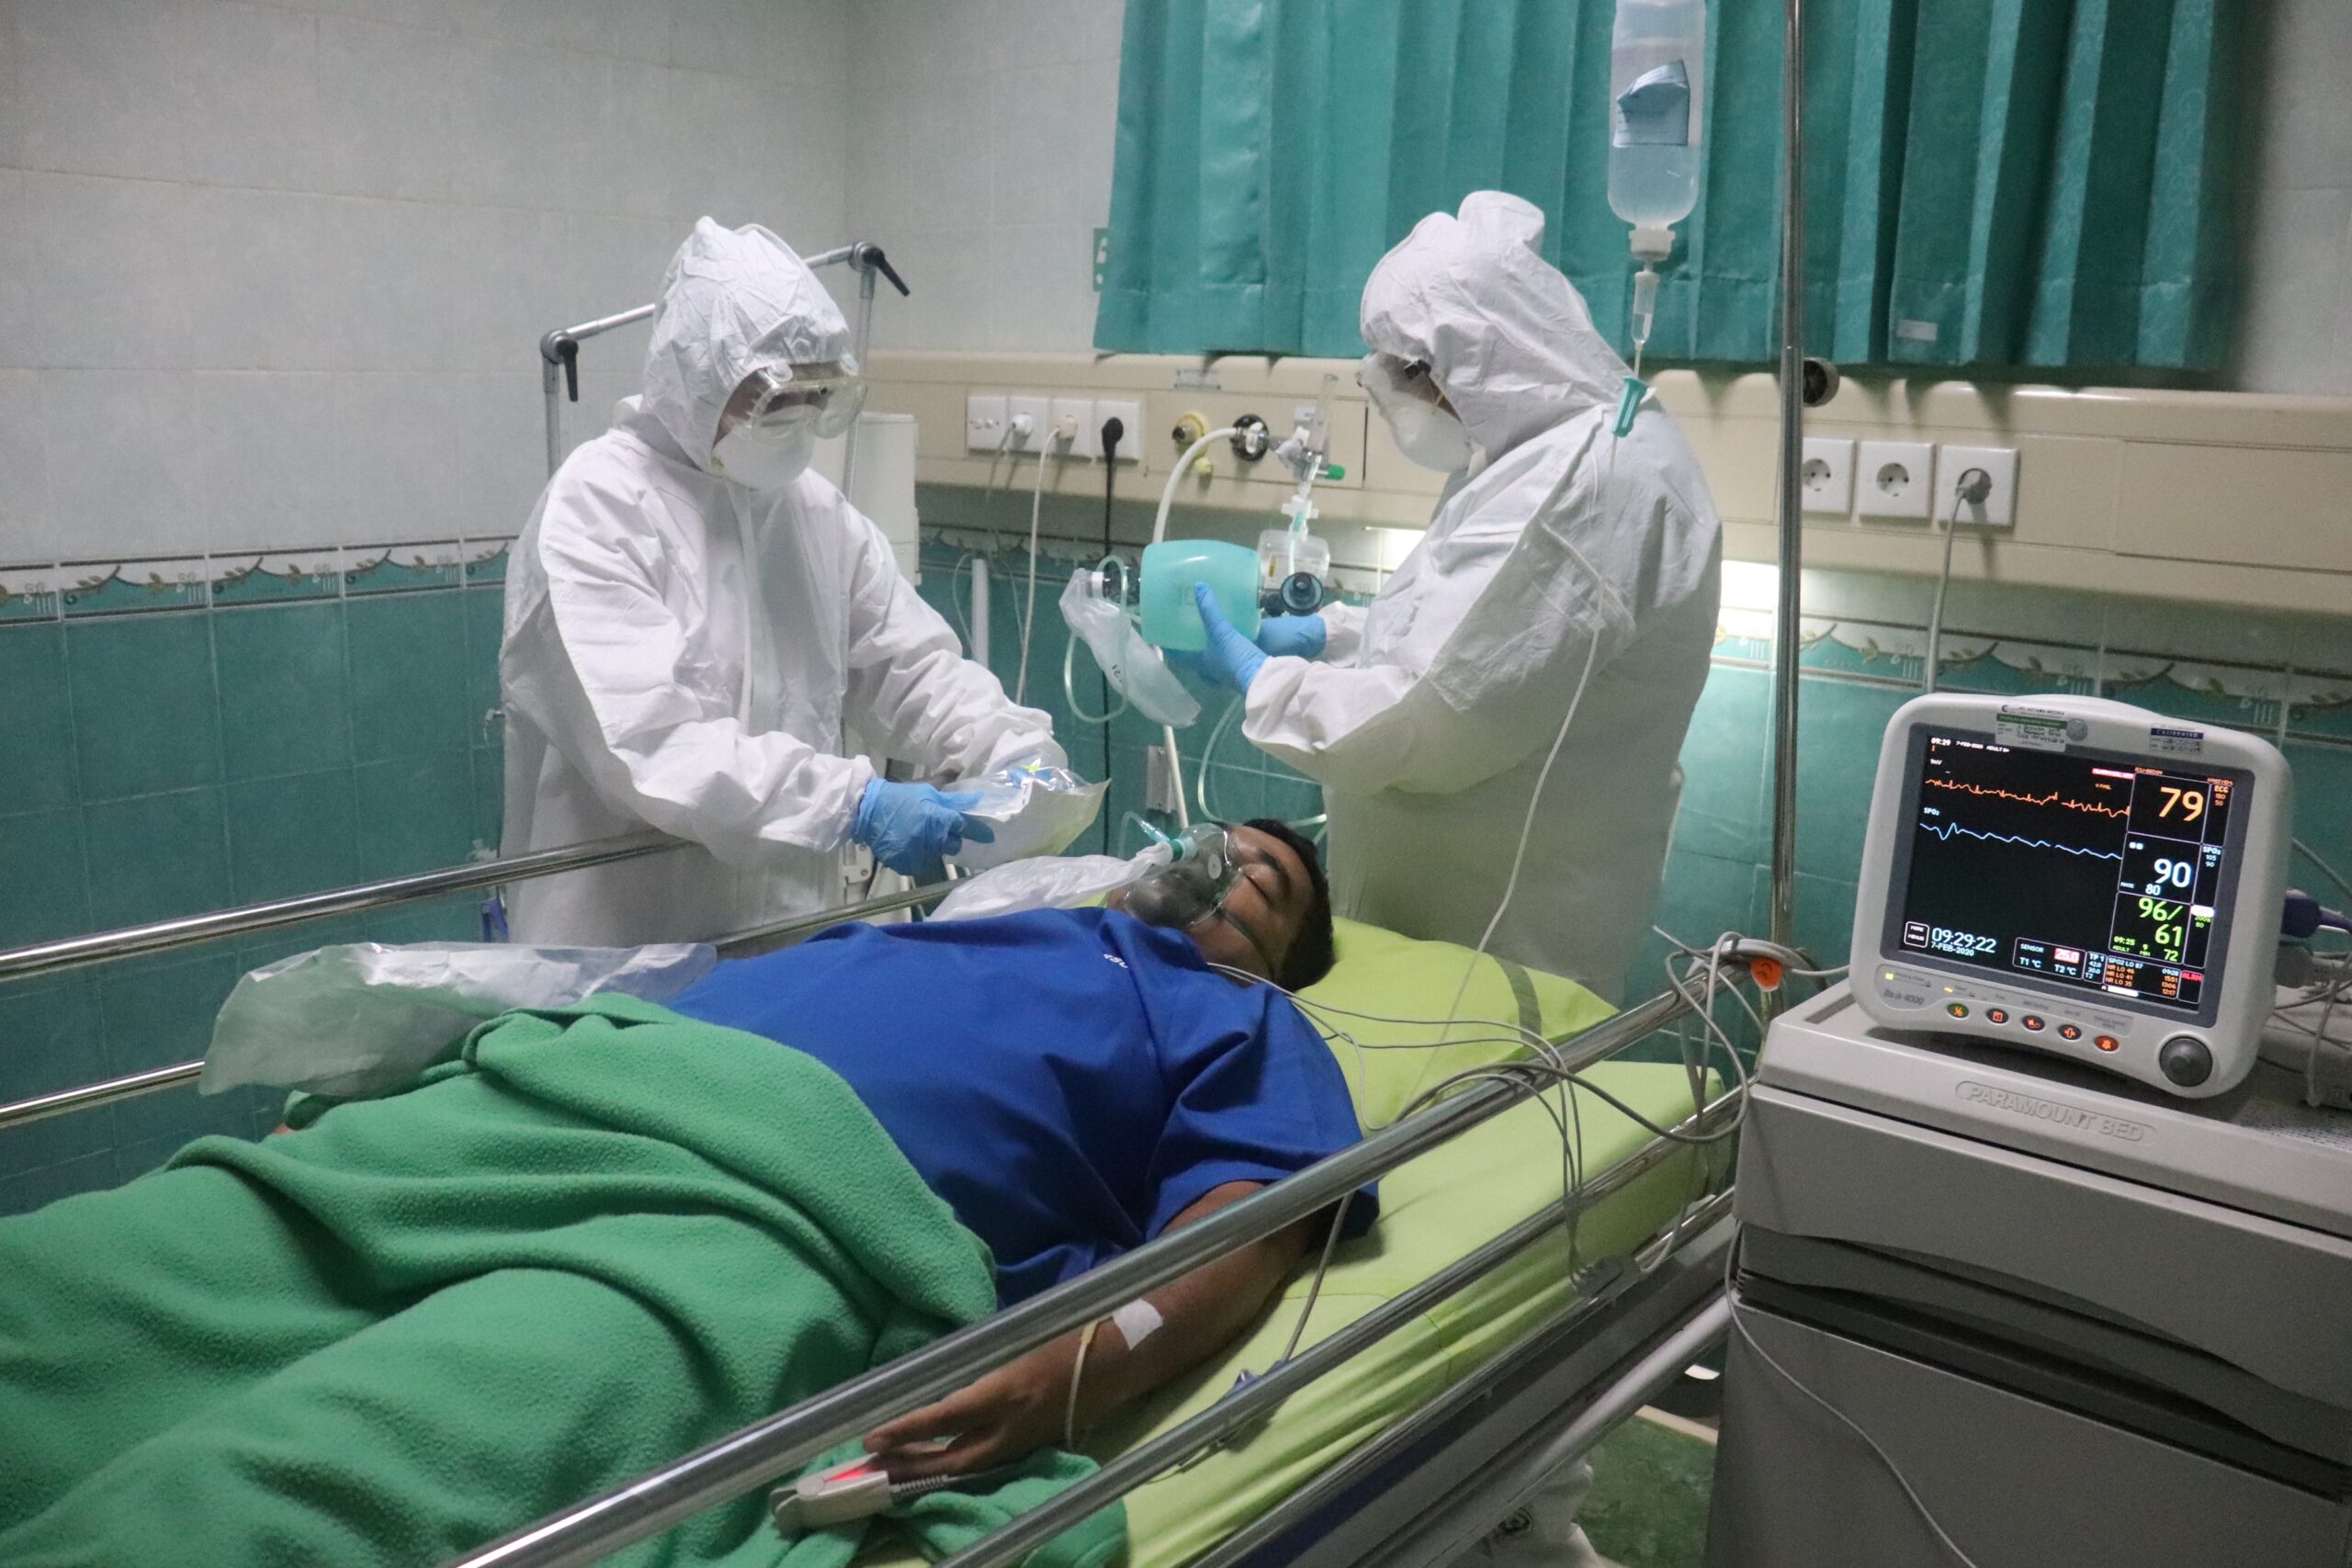 simulated covid-19 patients are in the ICU room